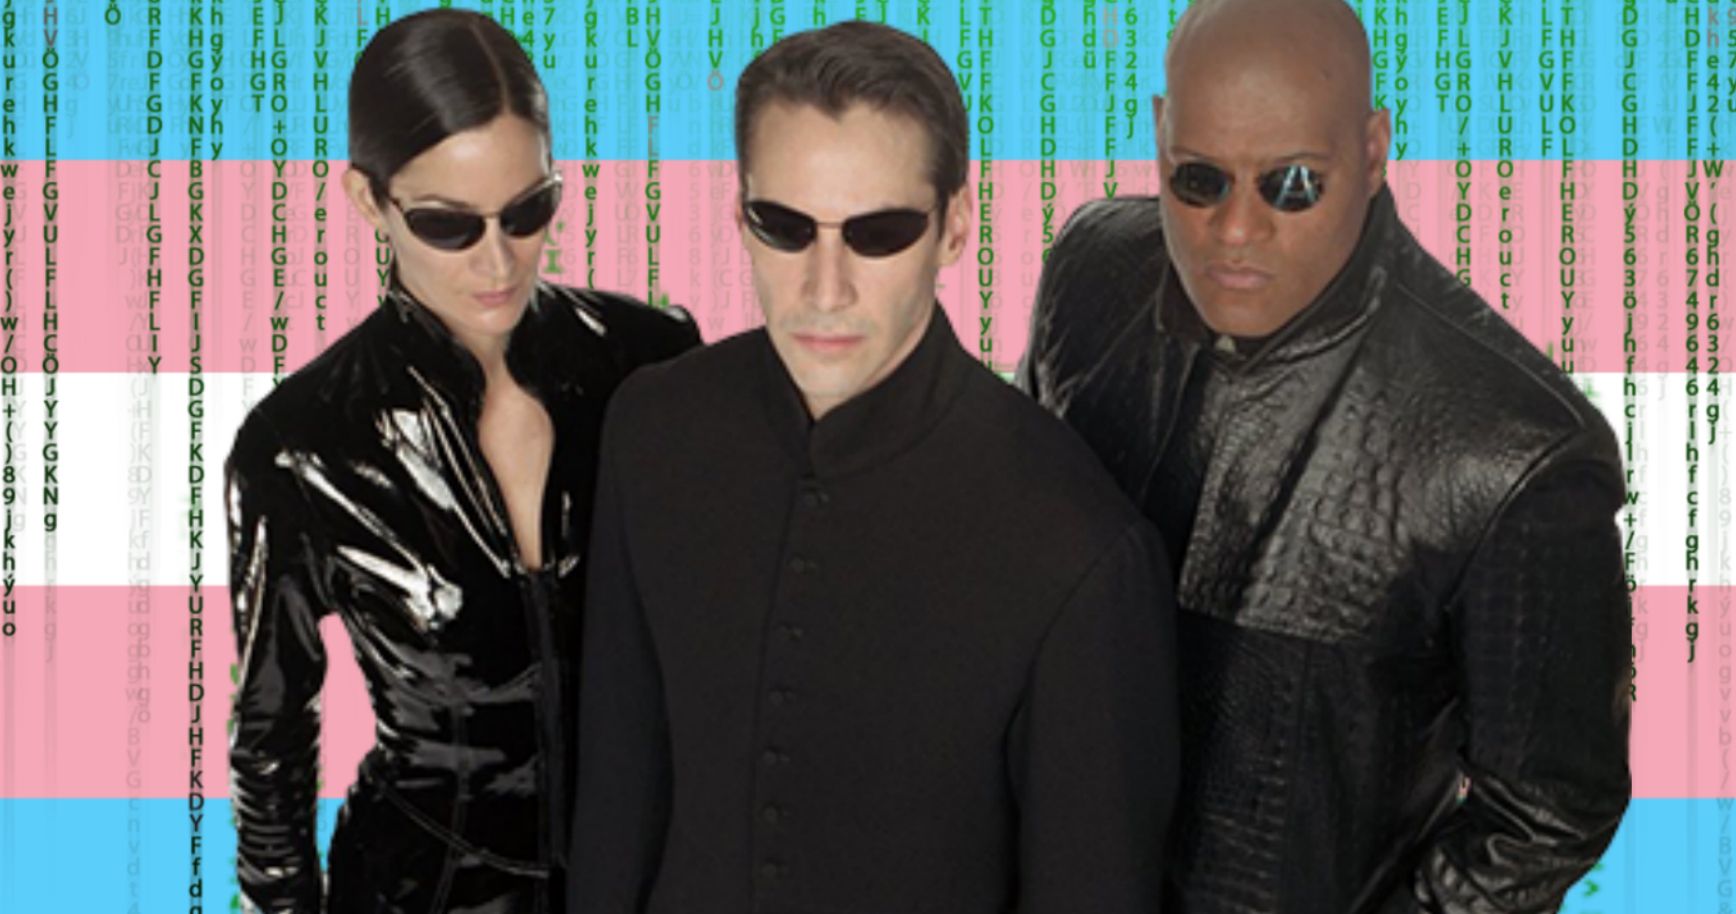 The Matrix Co-Creator Confirms Story Is a Trans Allegory